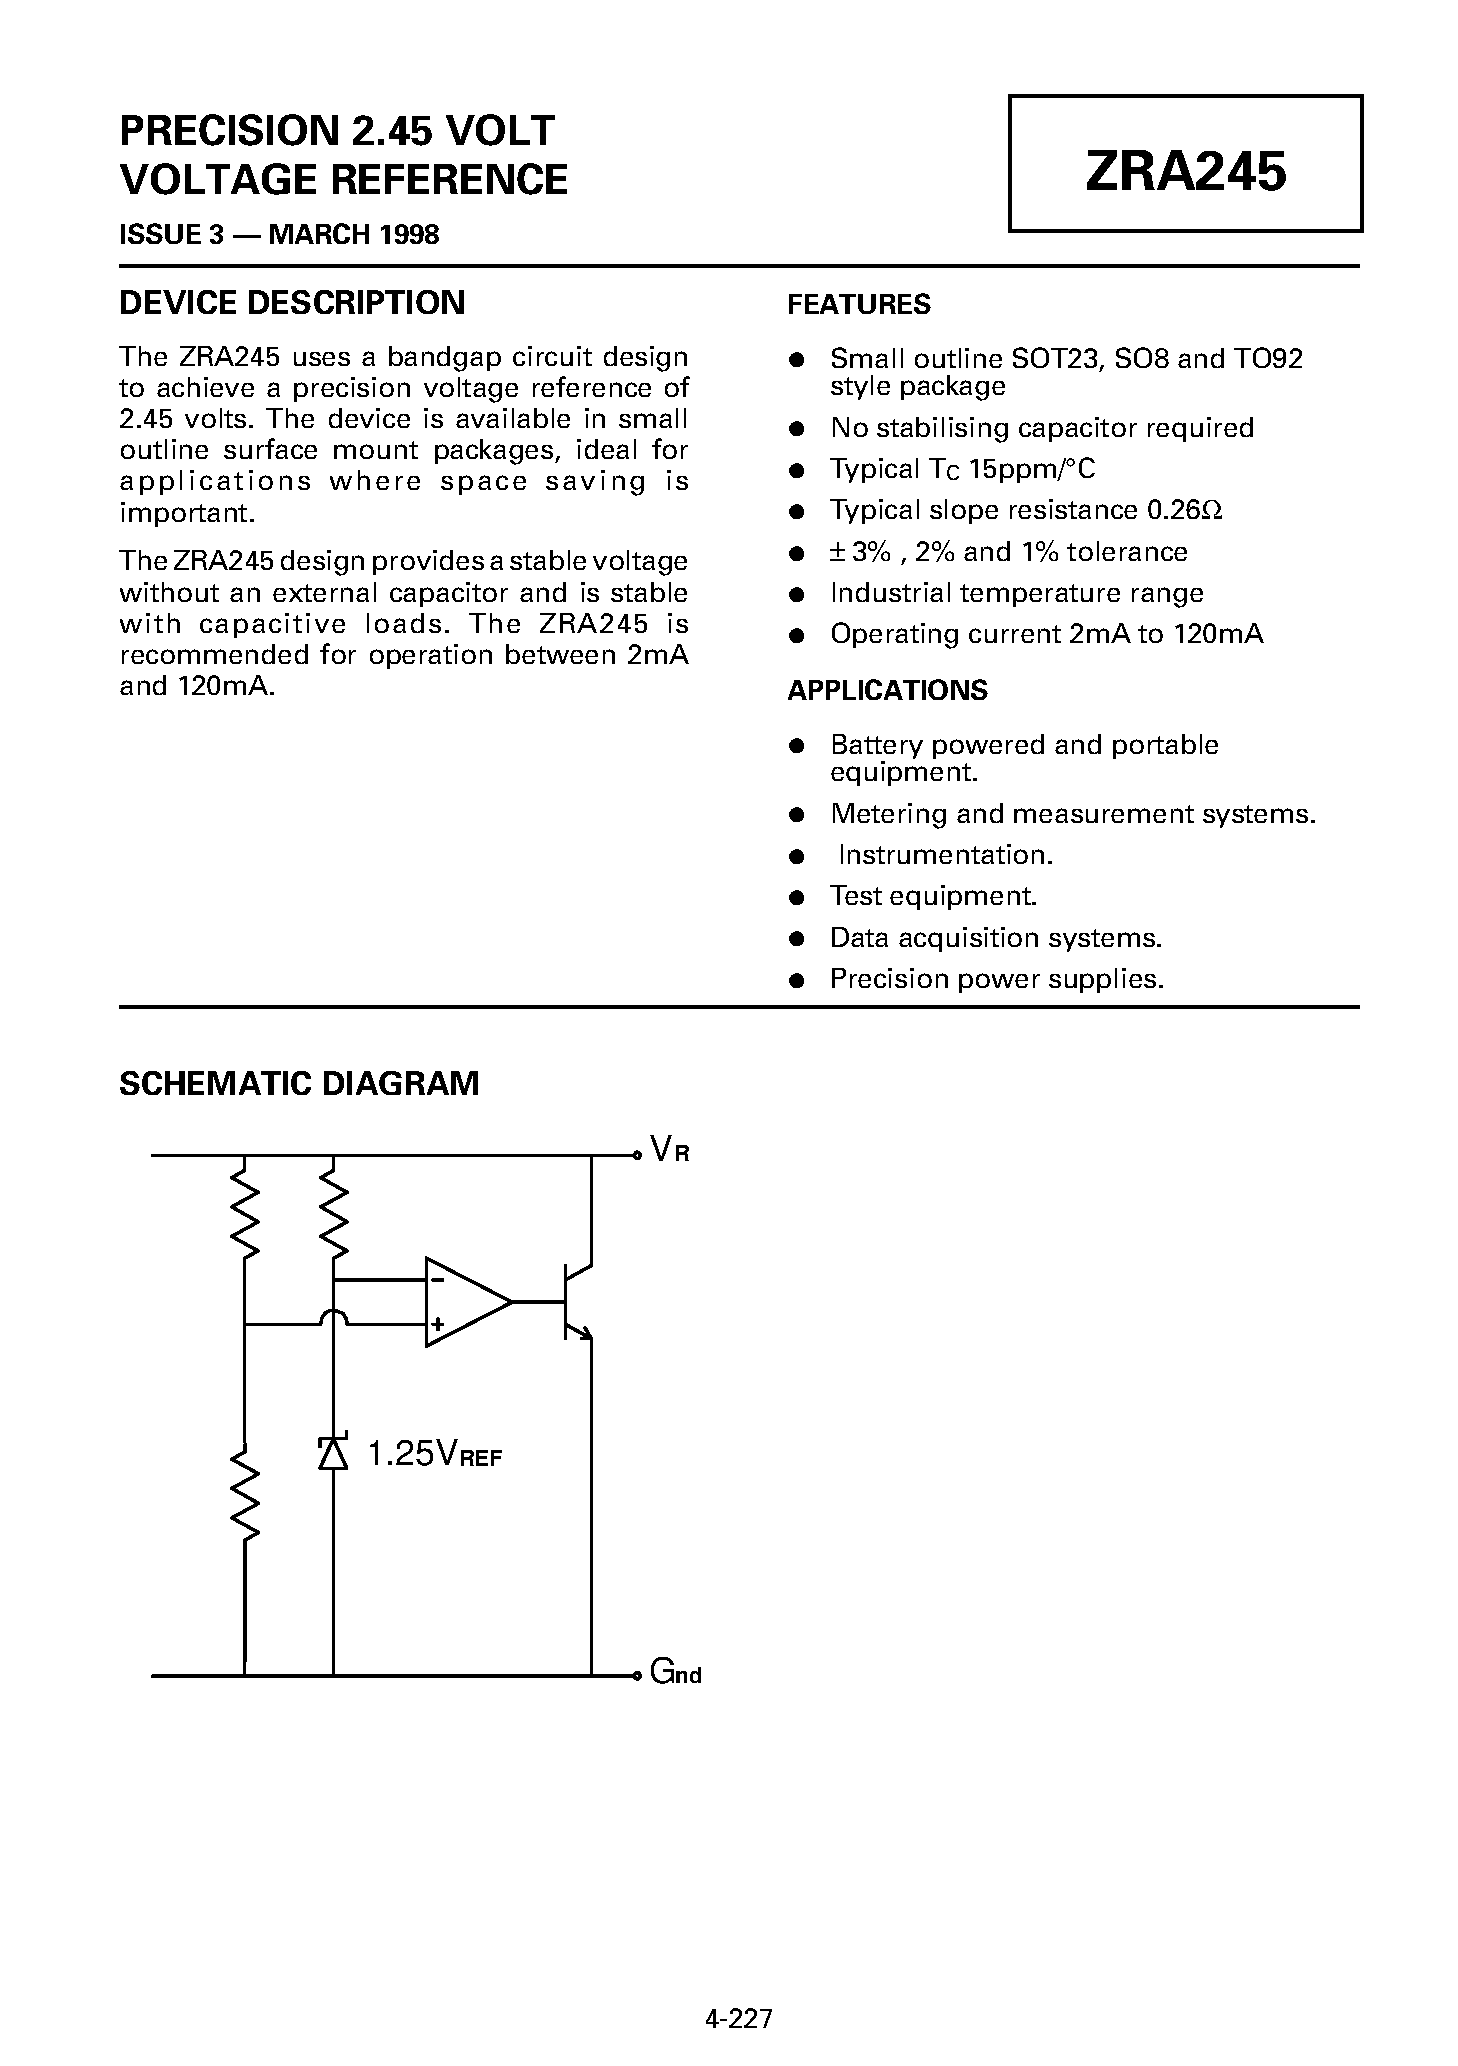 Datasheet ZRA245A01 - PRECISION 2.45 VOLT VOLTAGE REFERENCE page 1